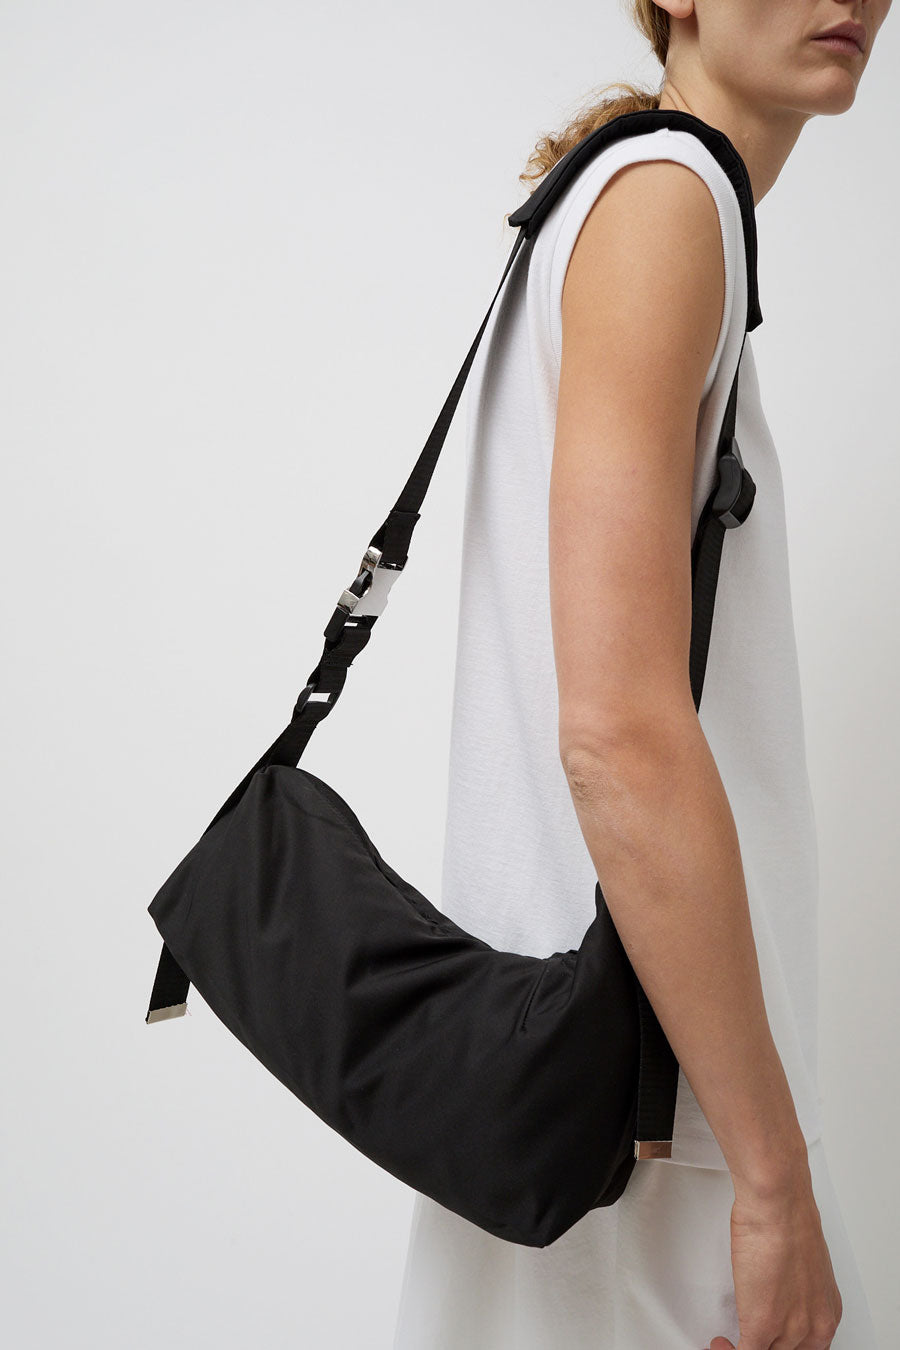 ARCS Touch Bag in Black